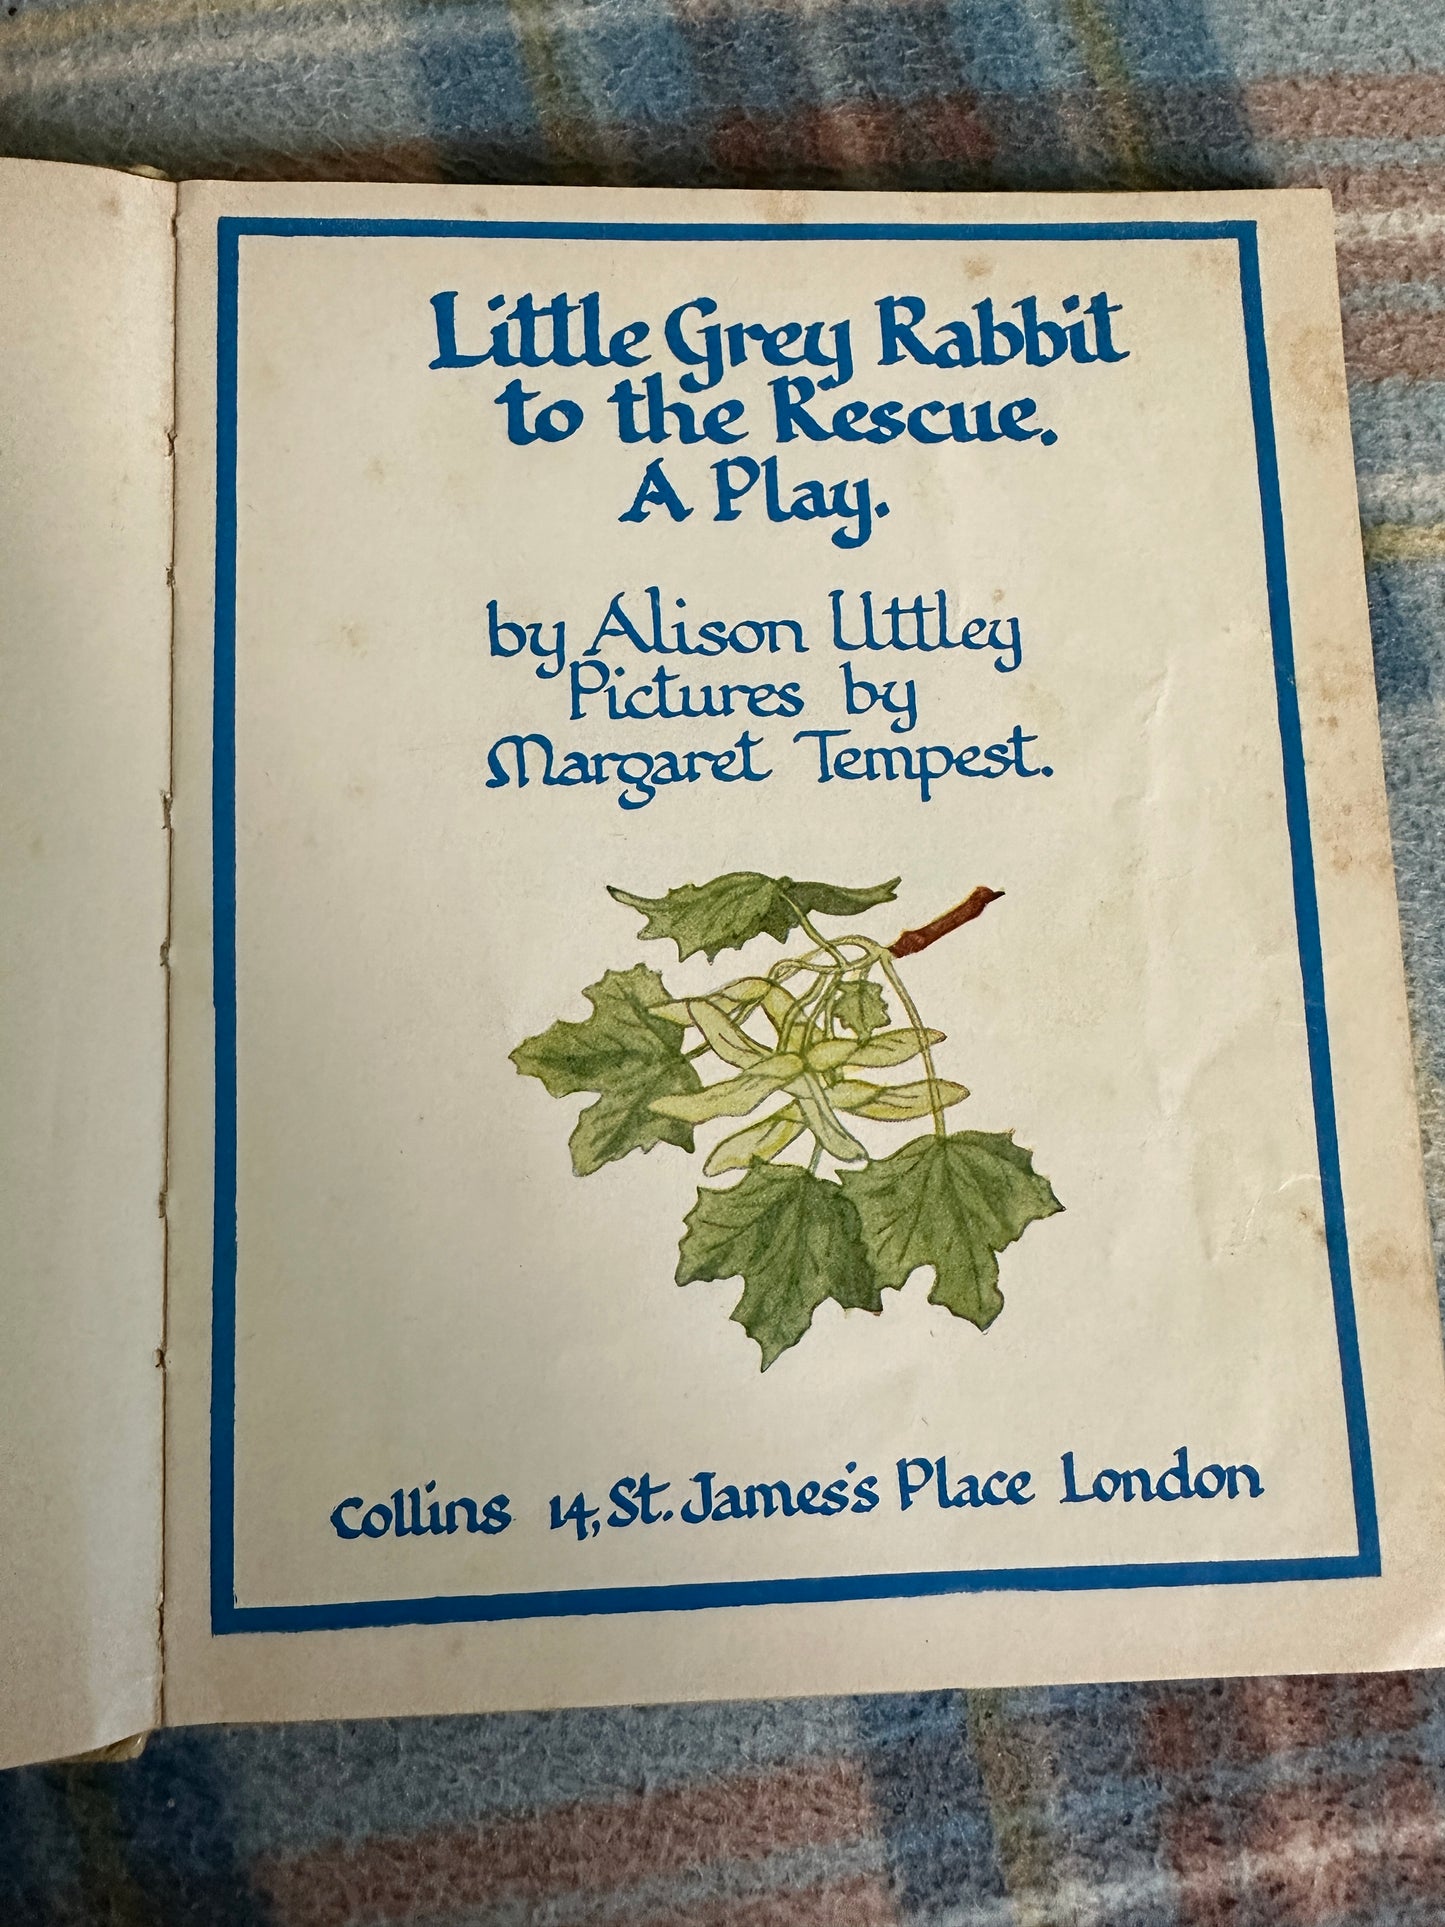 1970 Little Grey Rabbit To The Rescue(A Play) Alison Uttley(Margaret Tempest illustration) Collins